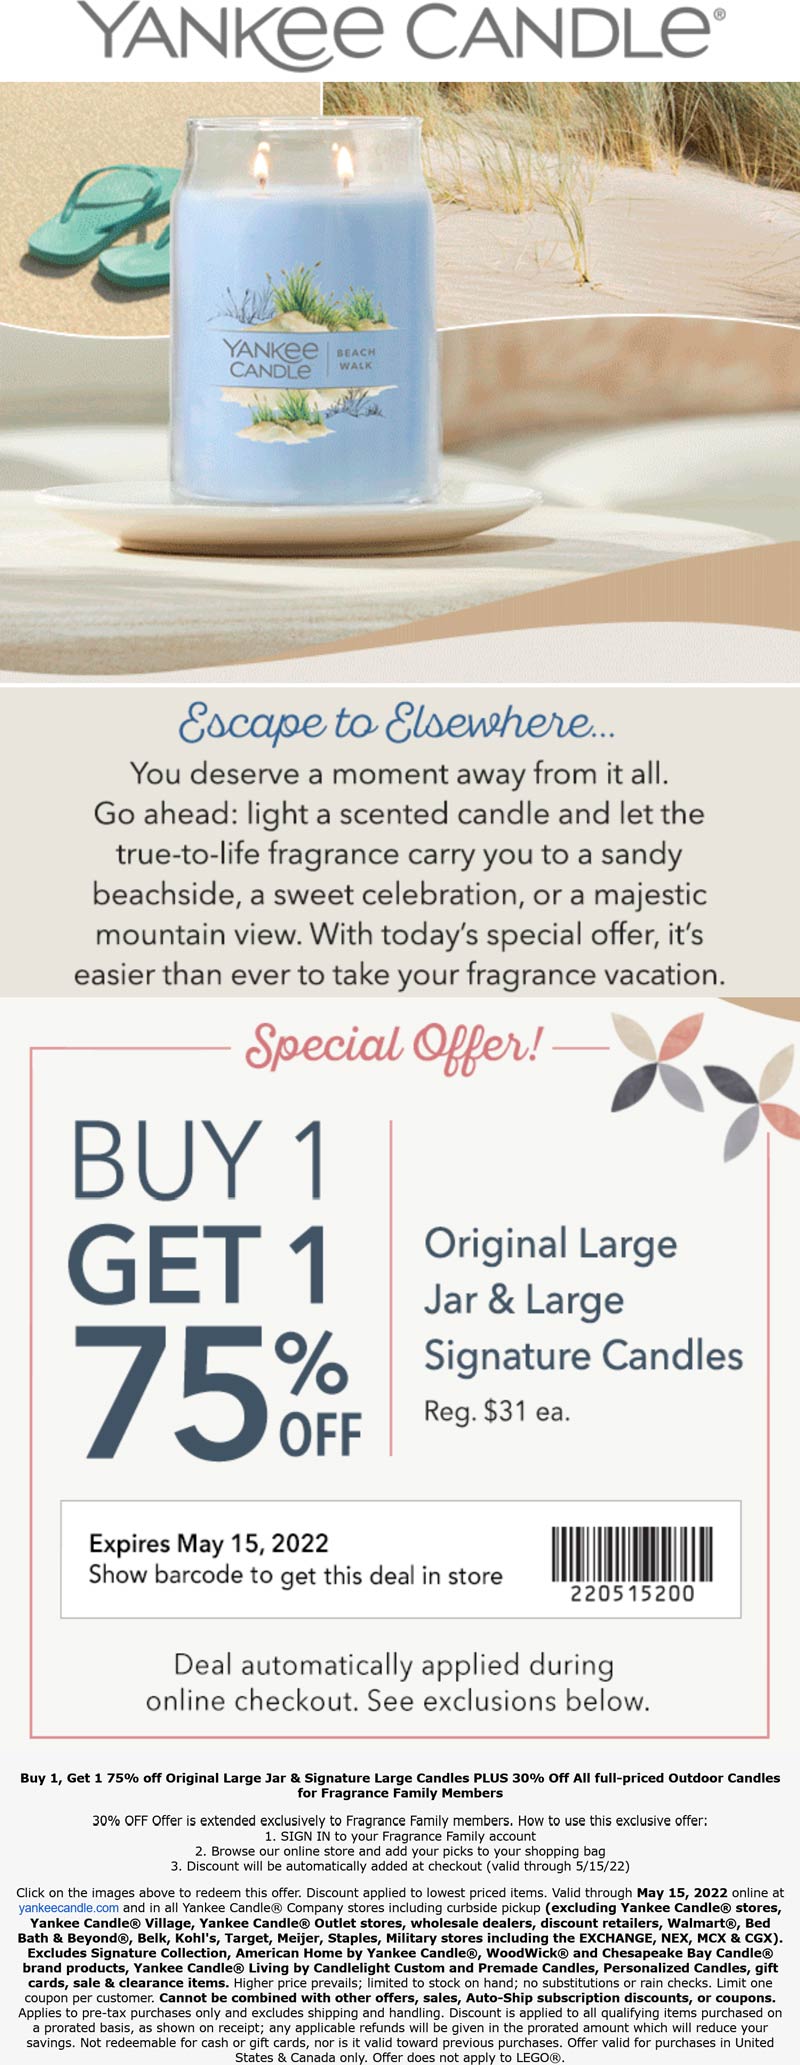 Yankee Candle coupons & promo code for [July 2022]